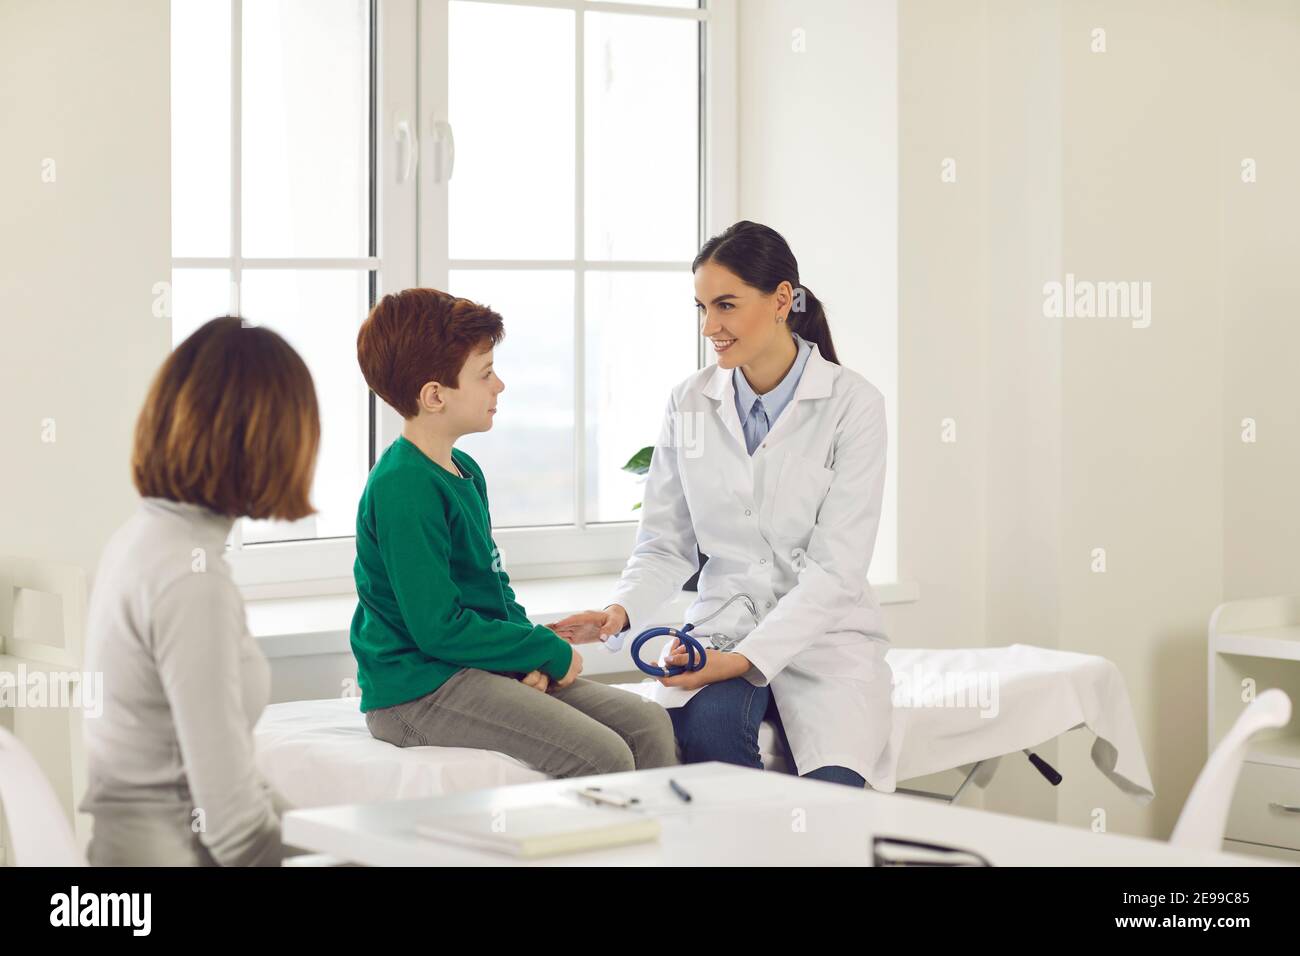 Female pediatrician talks to a little boy who came for a medical examination with his mother. Stock Photo